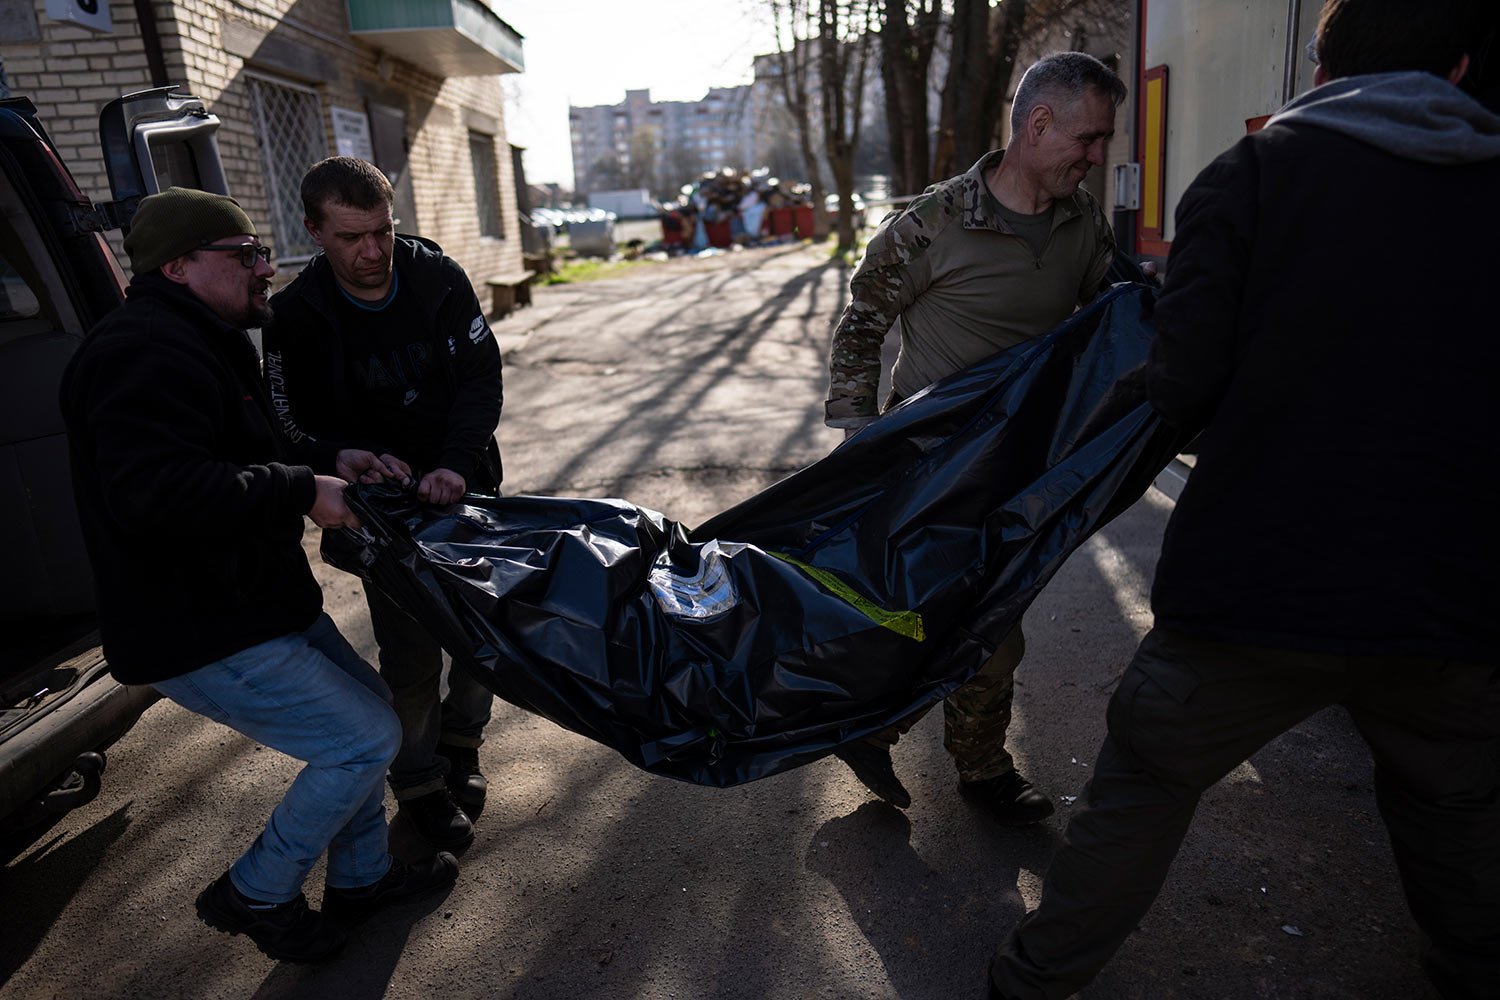  Volunteers carry the body of a man killed during the war to a refrigerated container in Bucha, in the outskirts of Kyiv, Ukraine, Thursday April 14, 2022. (AP Photo/Rodrigo Abd) 